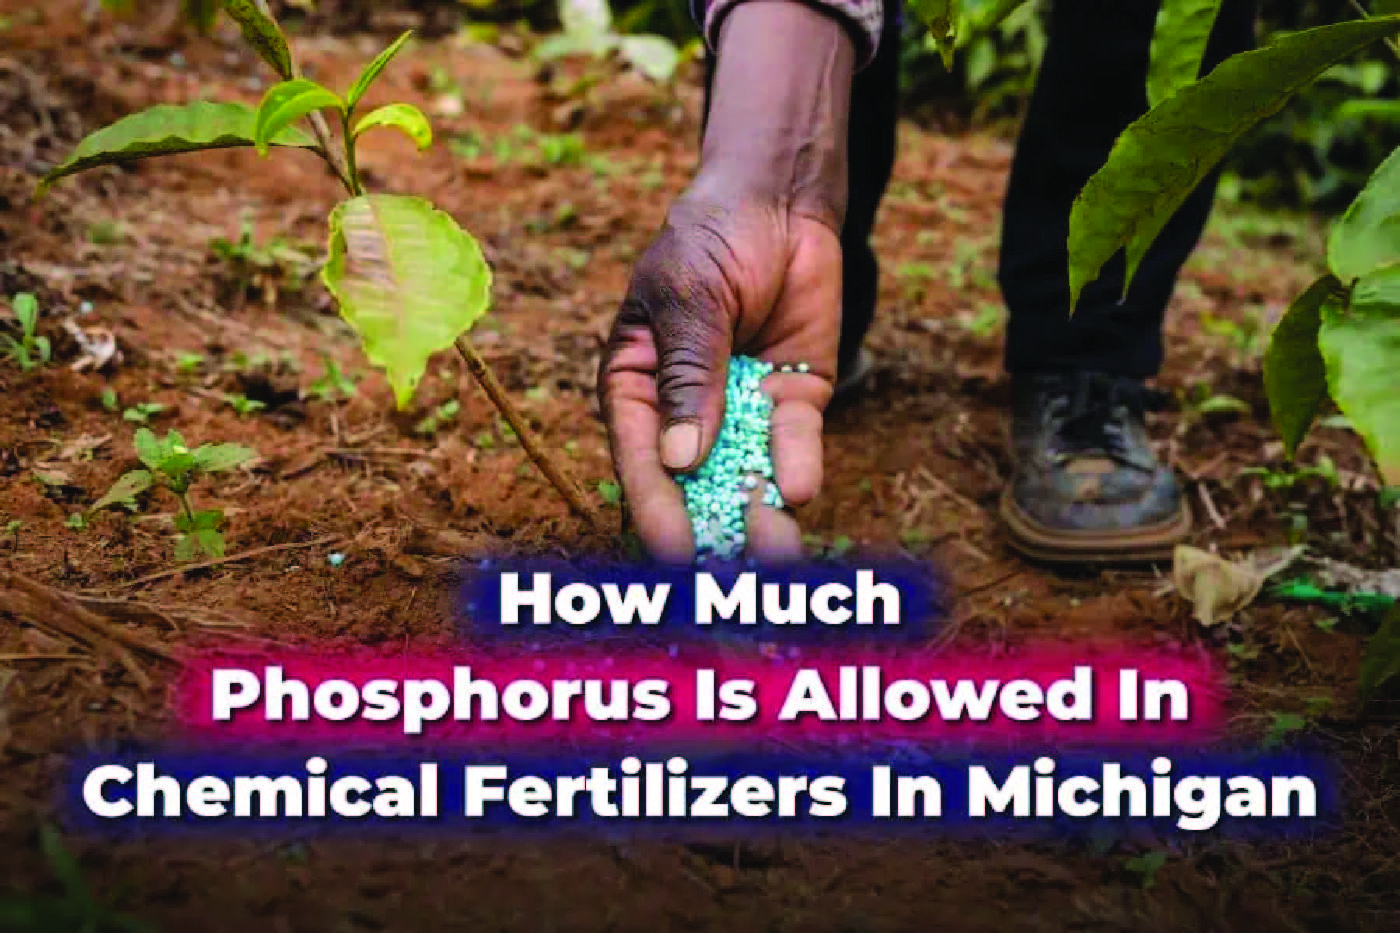 How Much Phosphorus Is Allowed In Chemical Fertilizers In Michigan